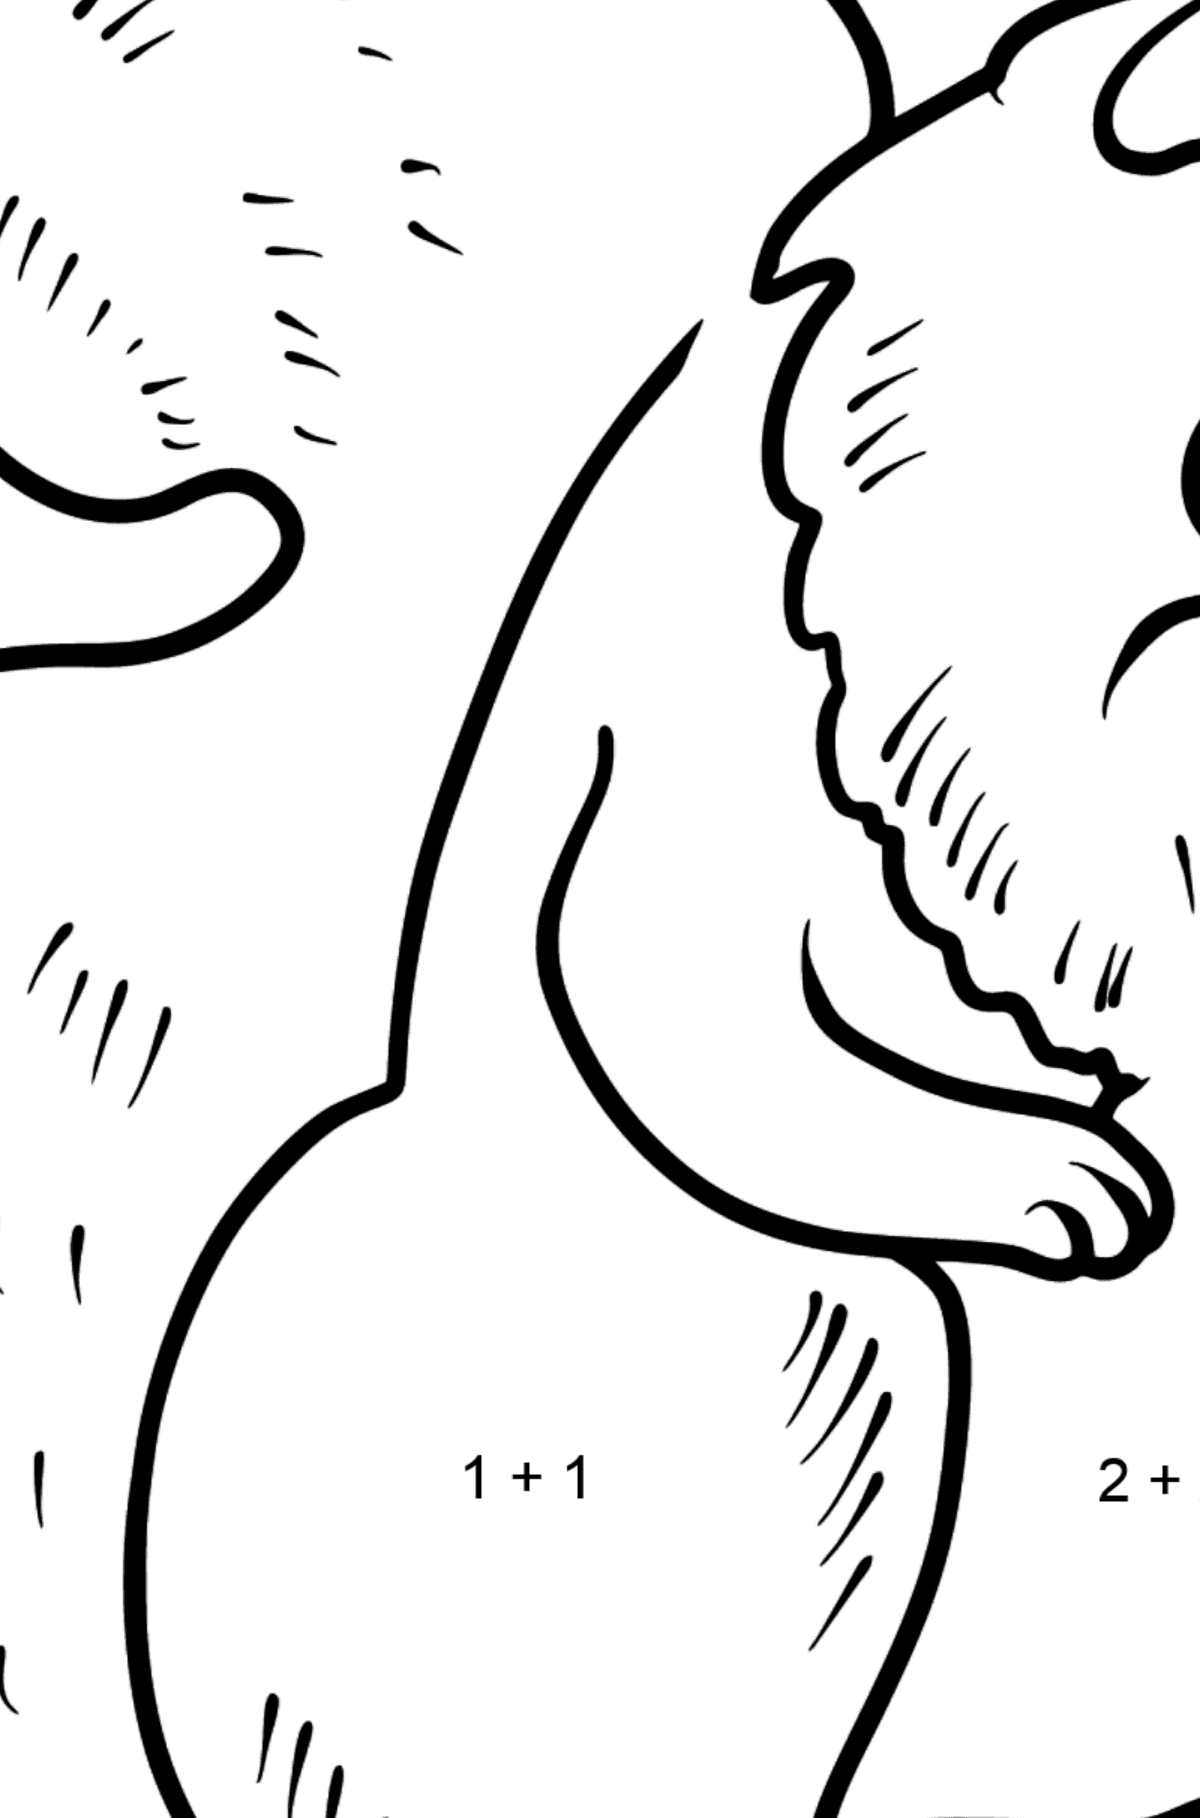 Squirrel coloring page - Math Coloring - Addition for Kids